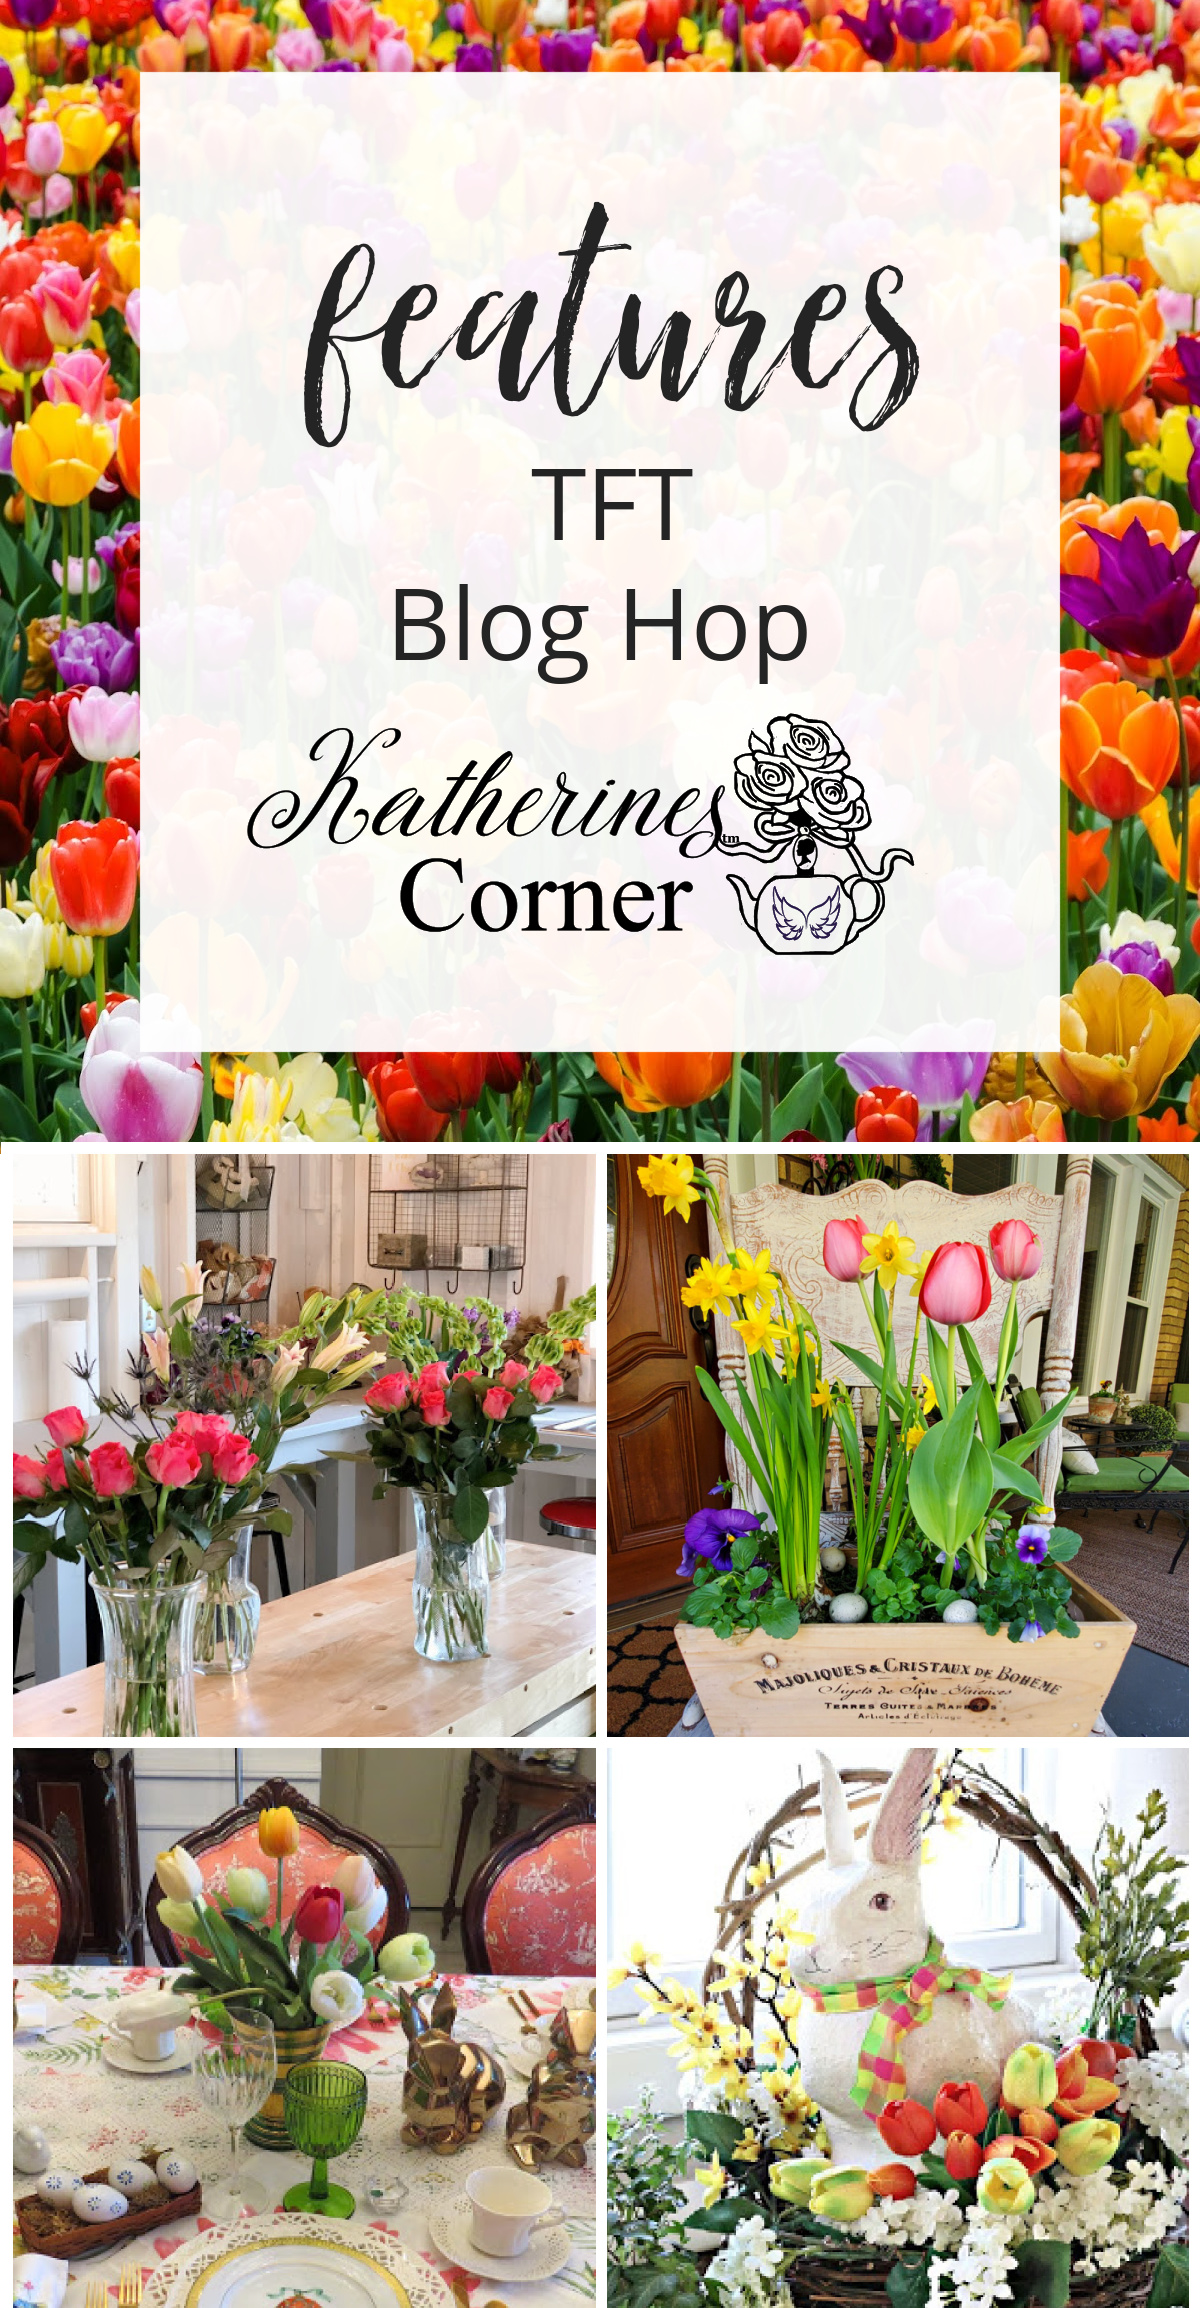 Tulips and TFT Blog Hop